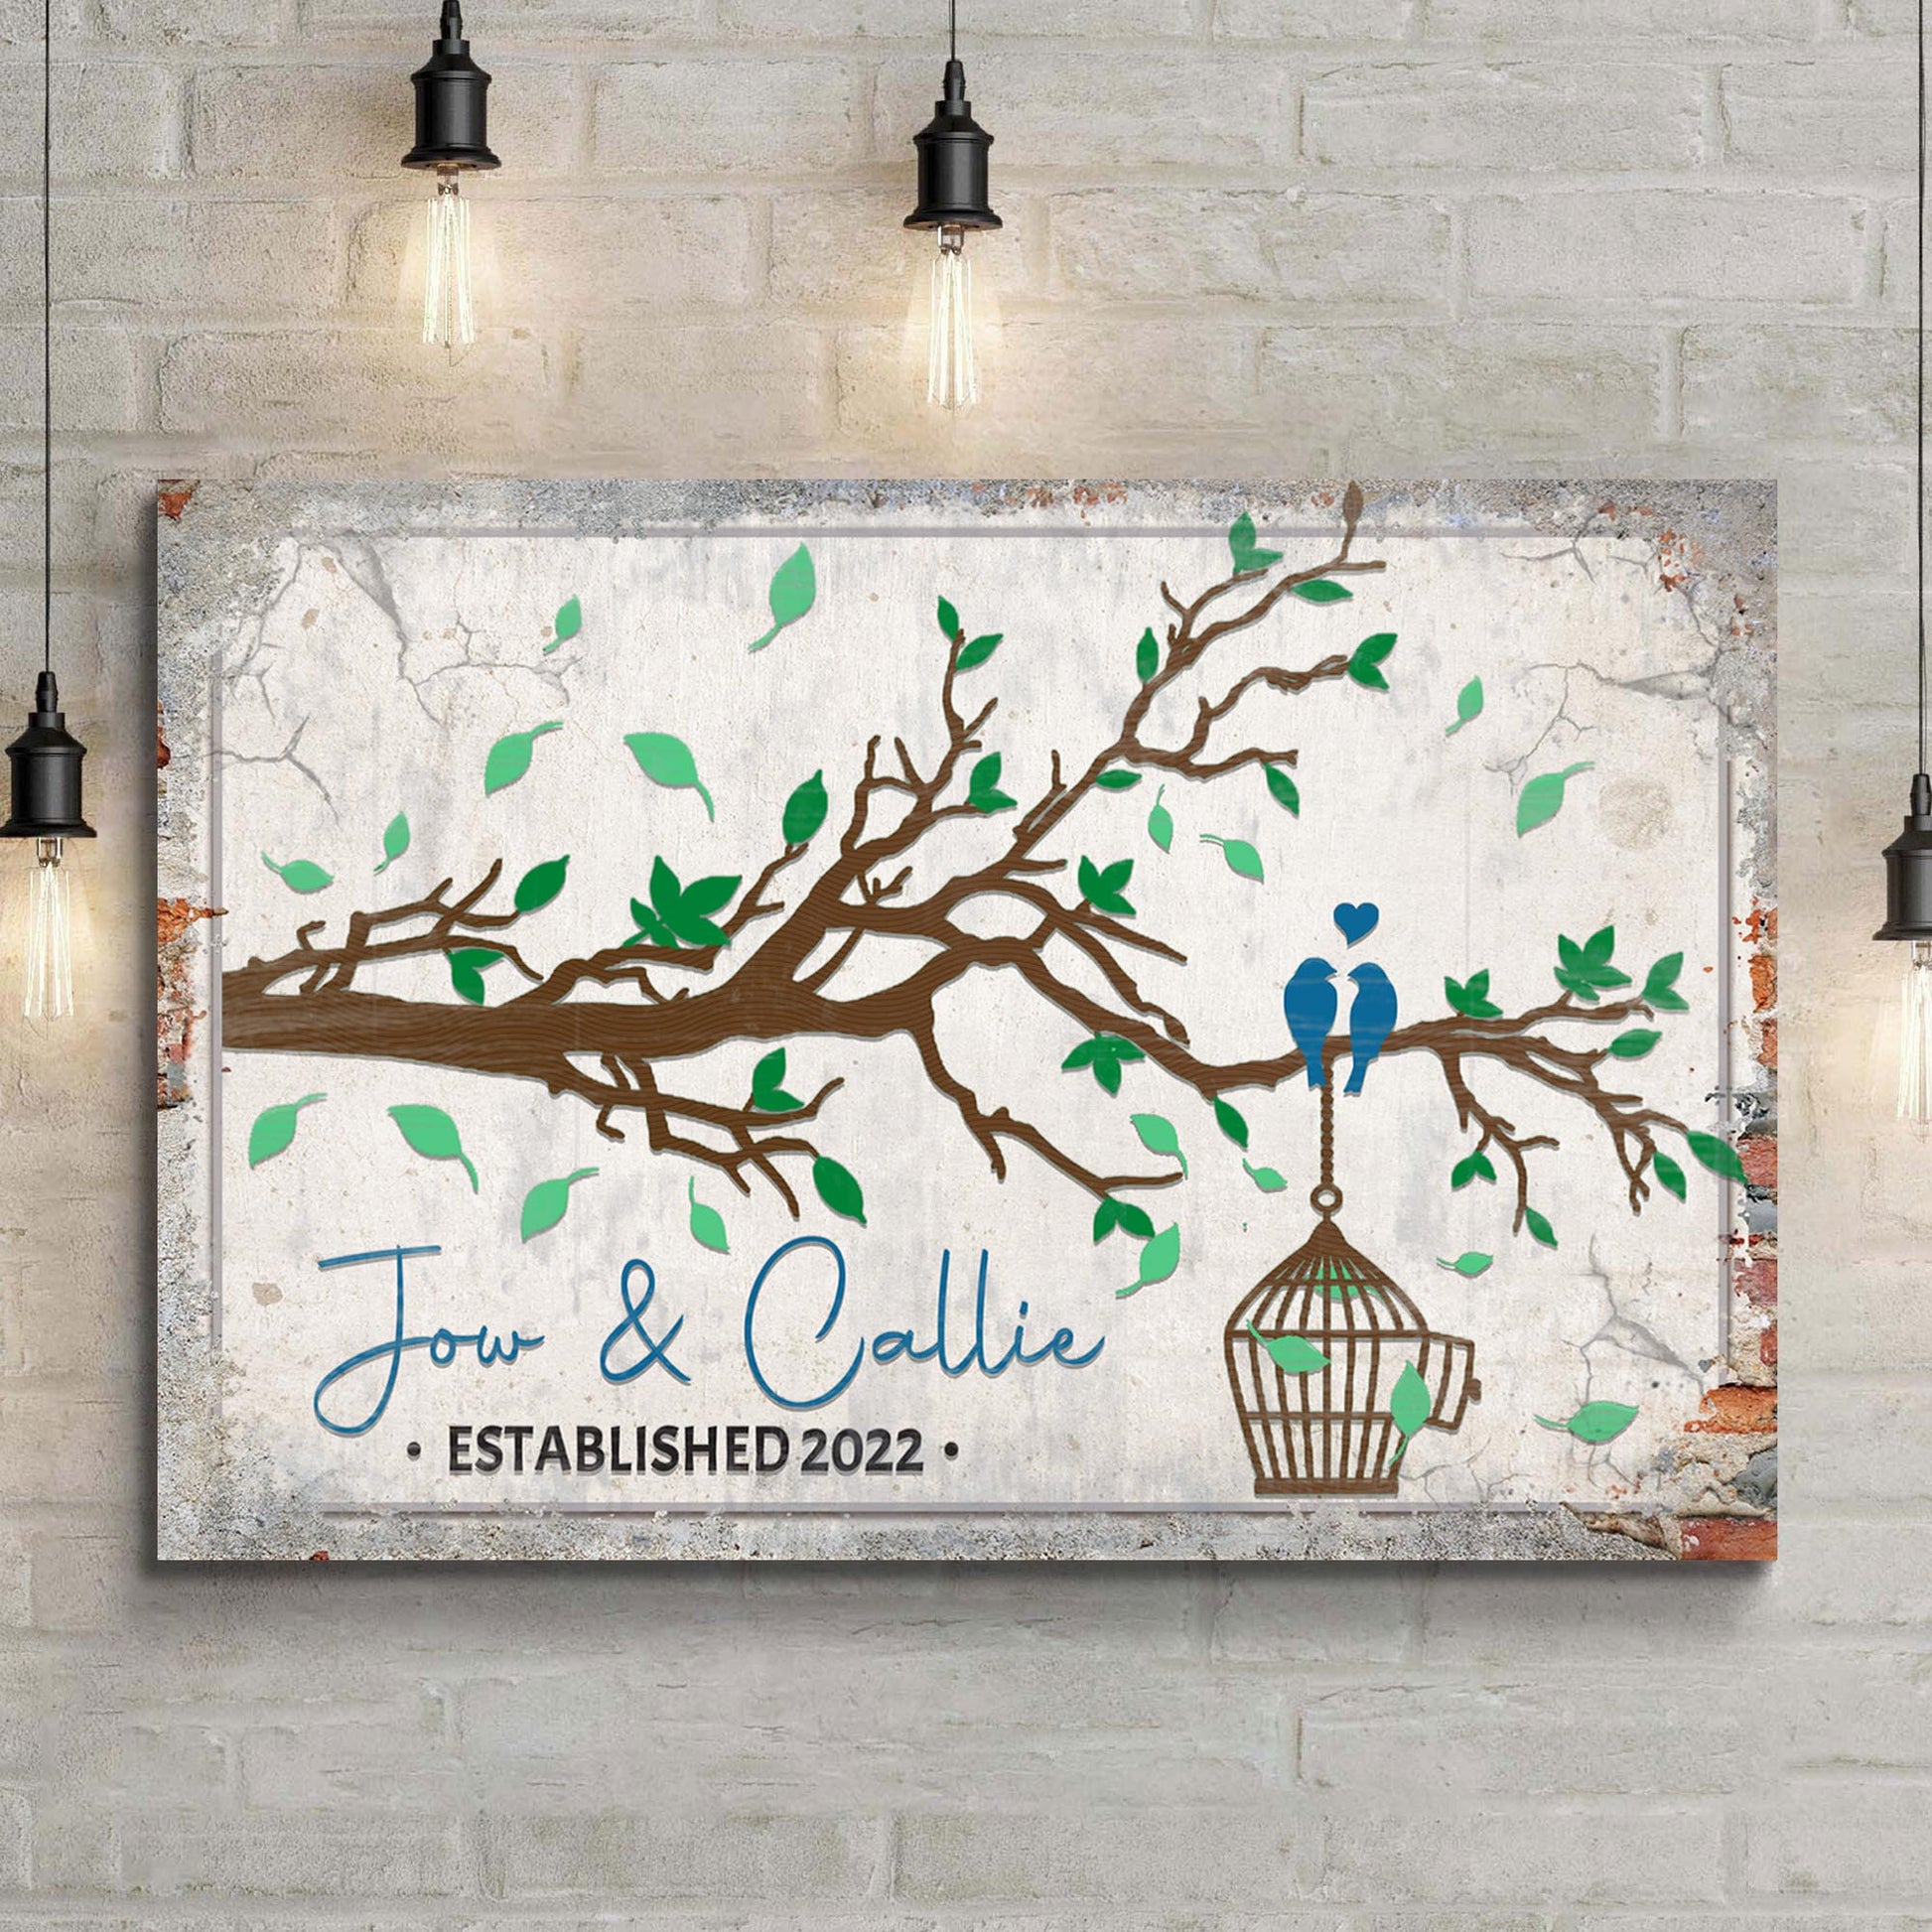 Love Birds Couple Sign - Image by Tailored Canvases